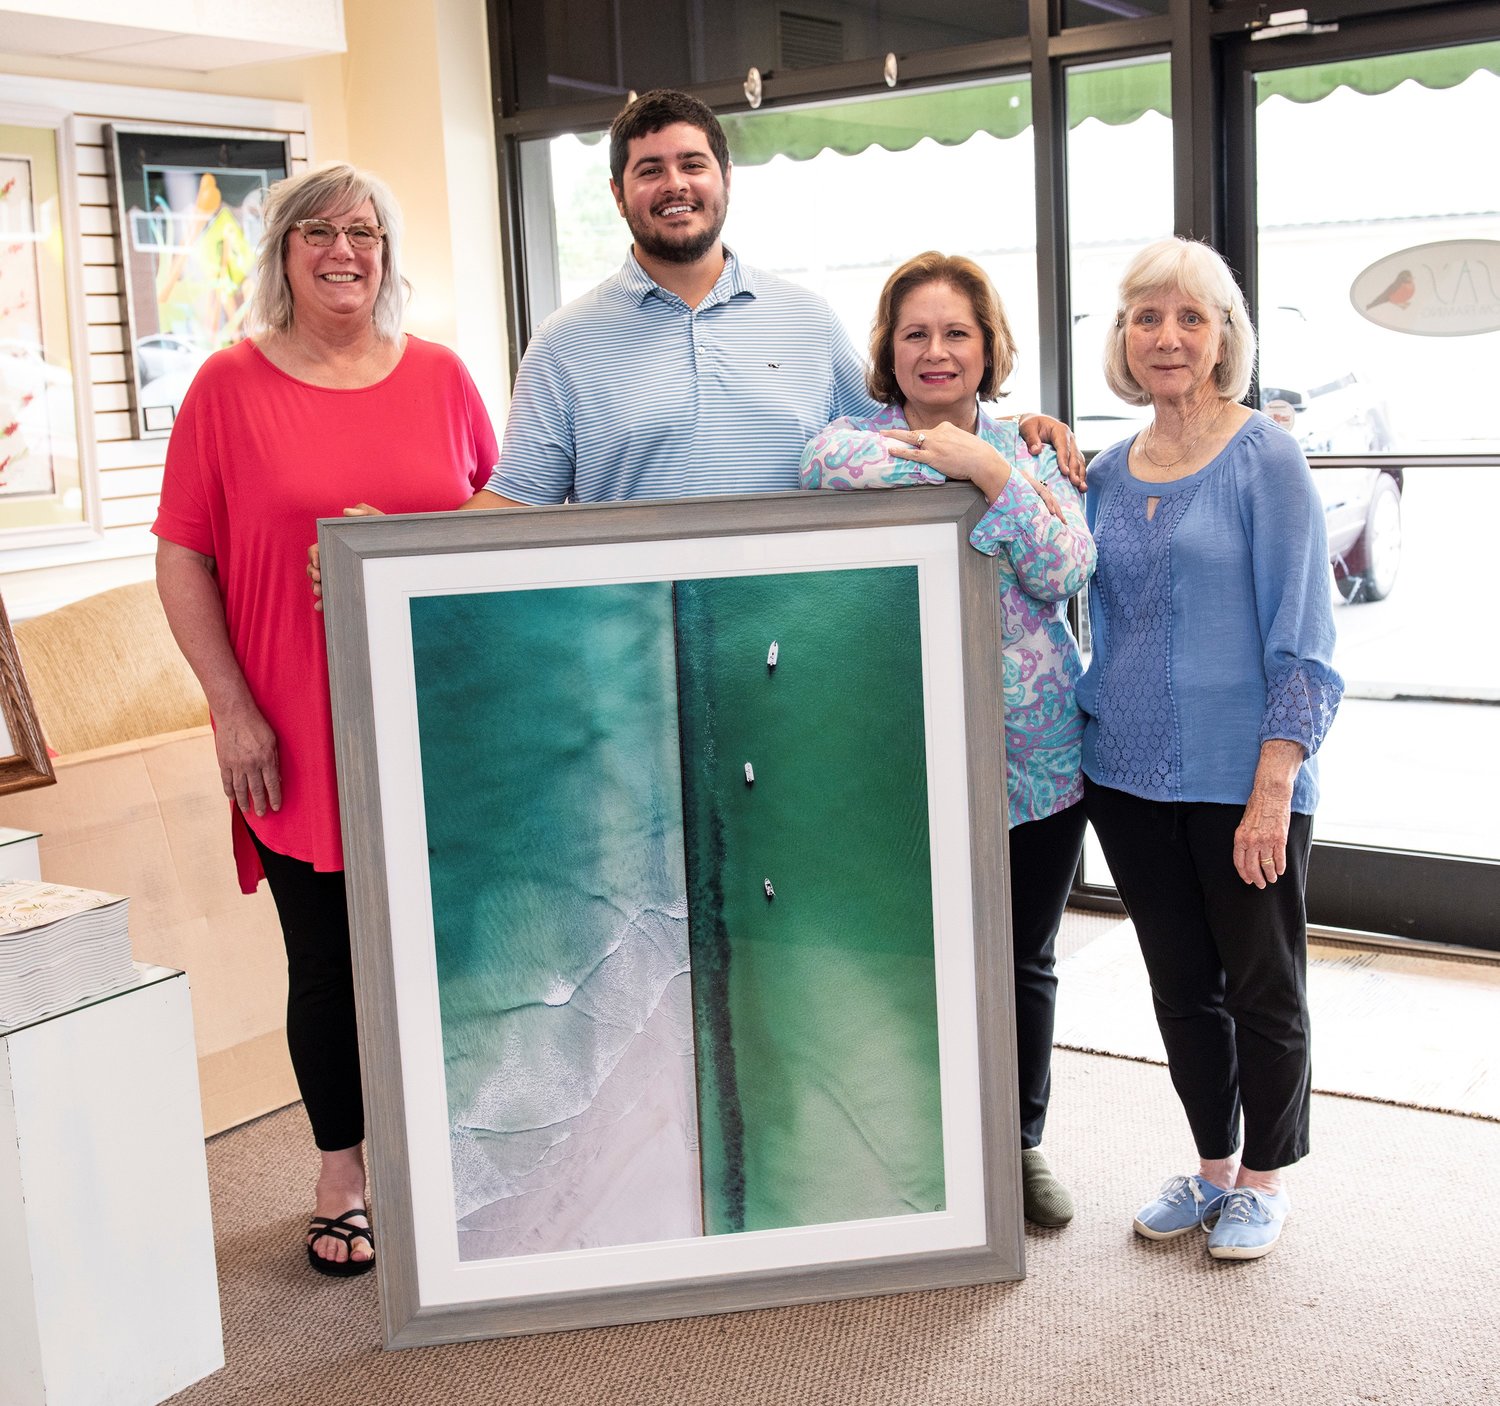 Join us for "An Evening of Art and Wine" at Lisa's Custom Framing on June 9 from 5 to 7 p.m. at 1226 Fort Bragg Road in the heart of Haymount. Enjoy a glass of wine, meet artist Kevin Collie and browse through an awe-inspiring collection of photos.